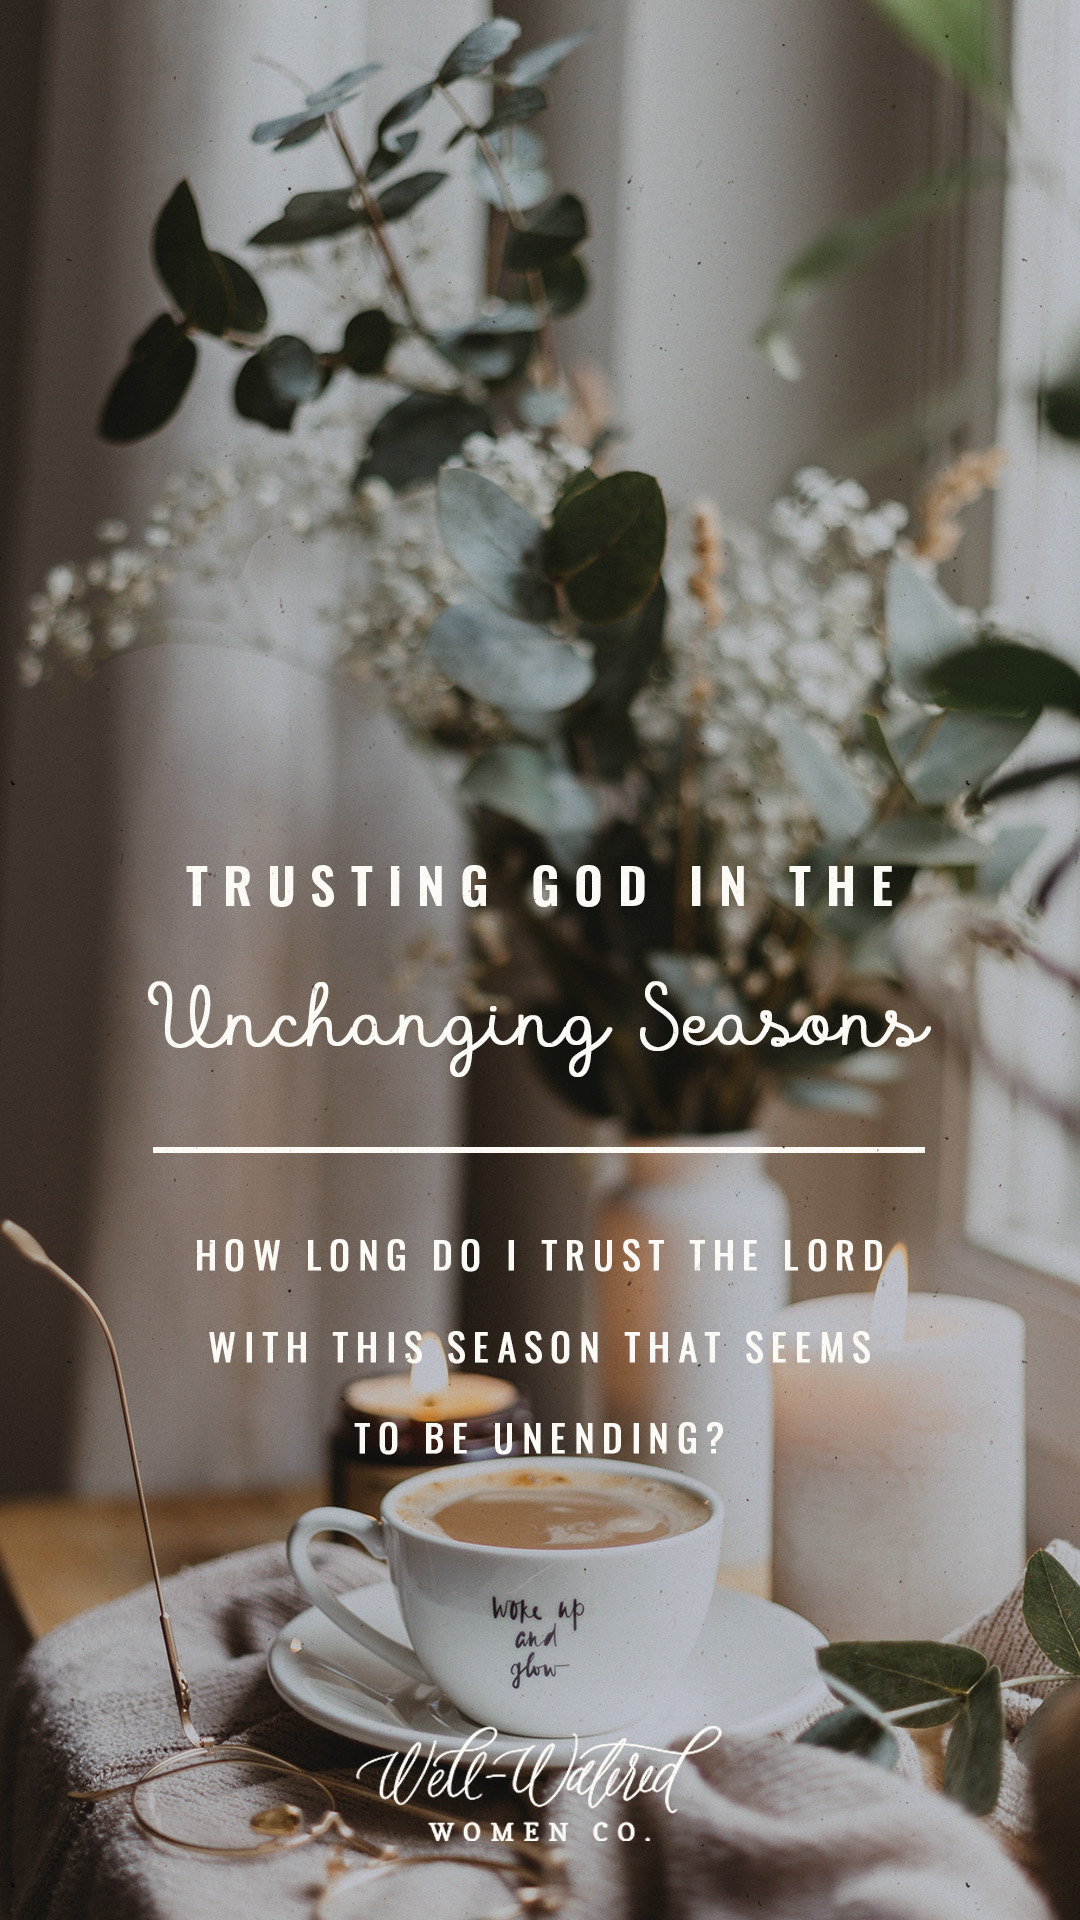 Well Watered Women Blog | Trusting God in Unchanging Seasons